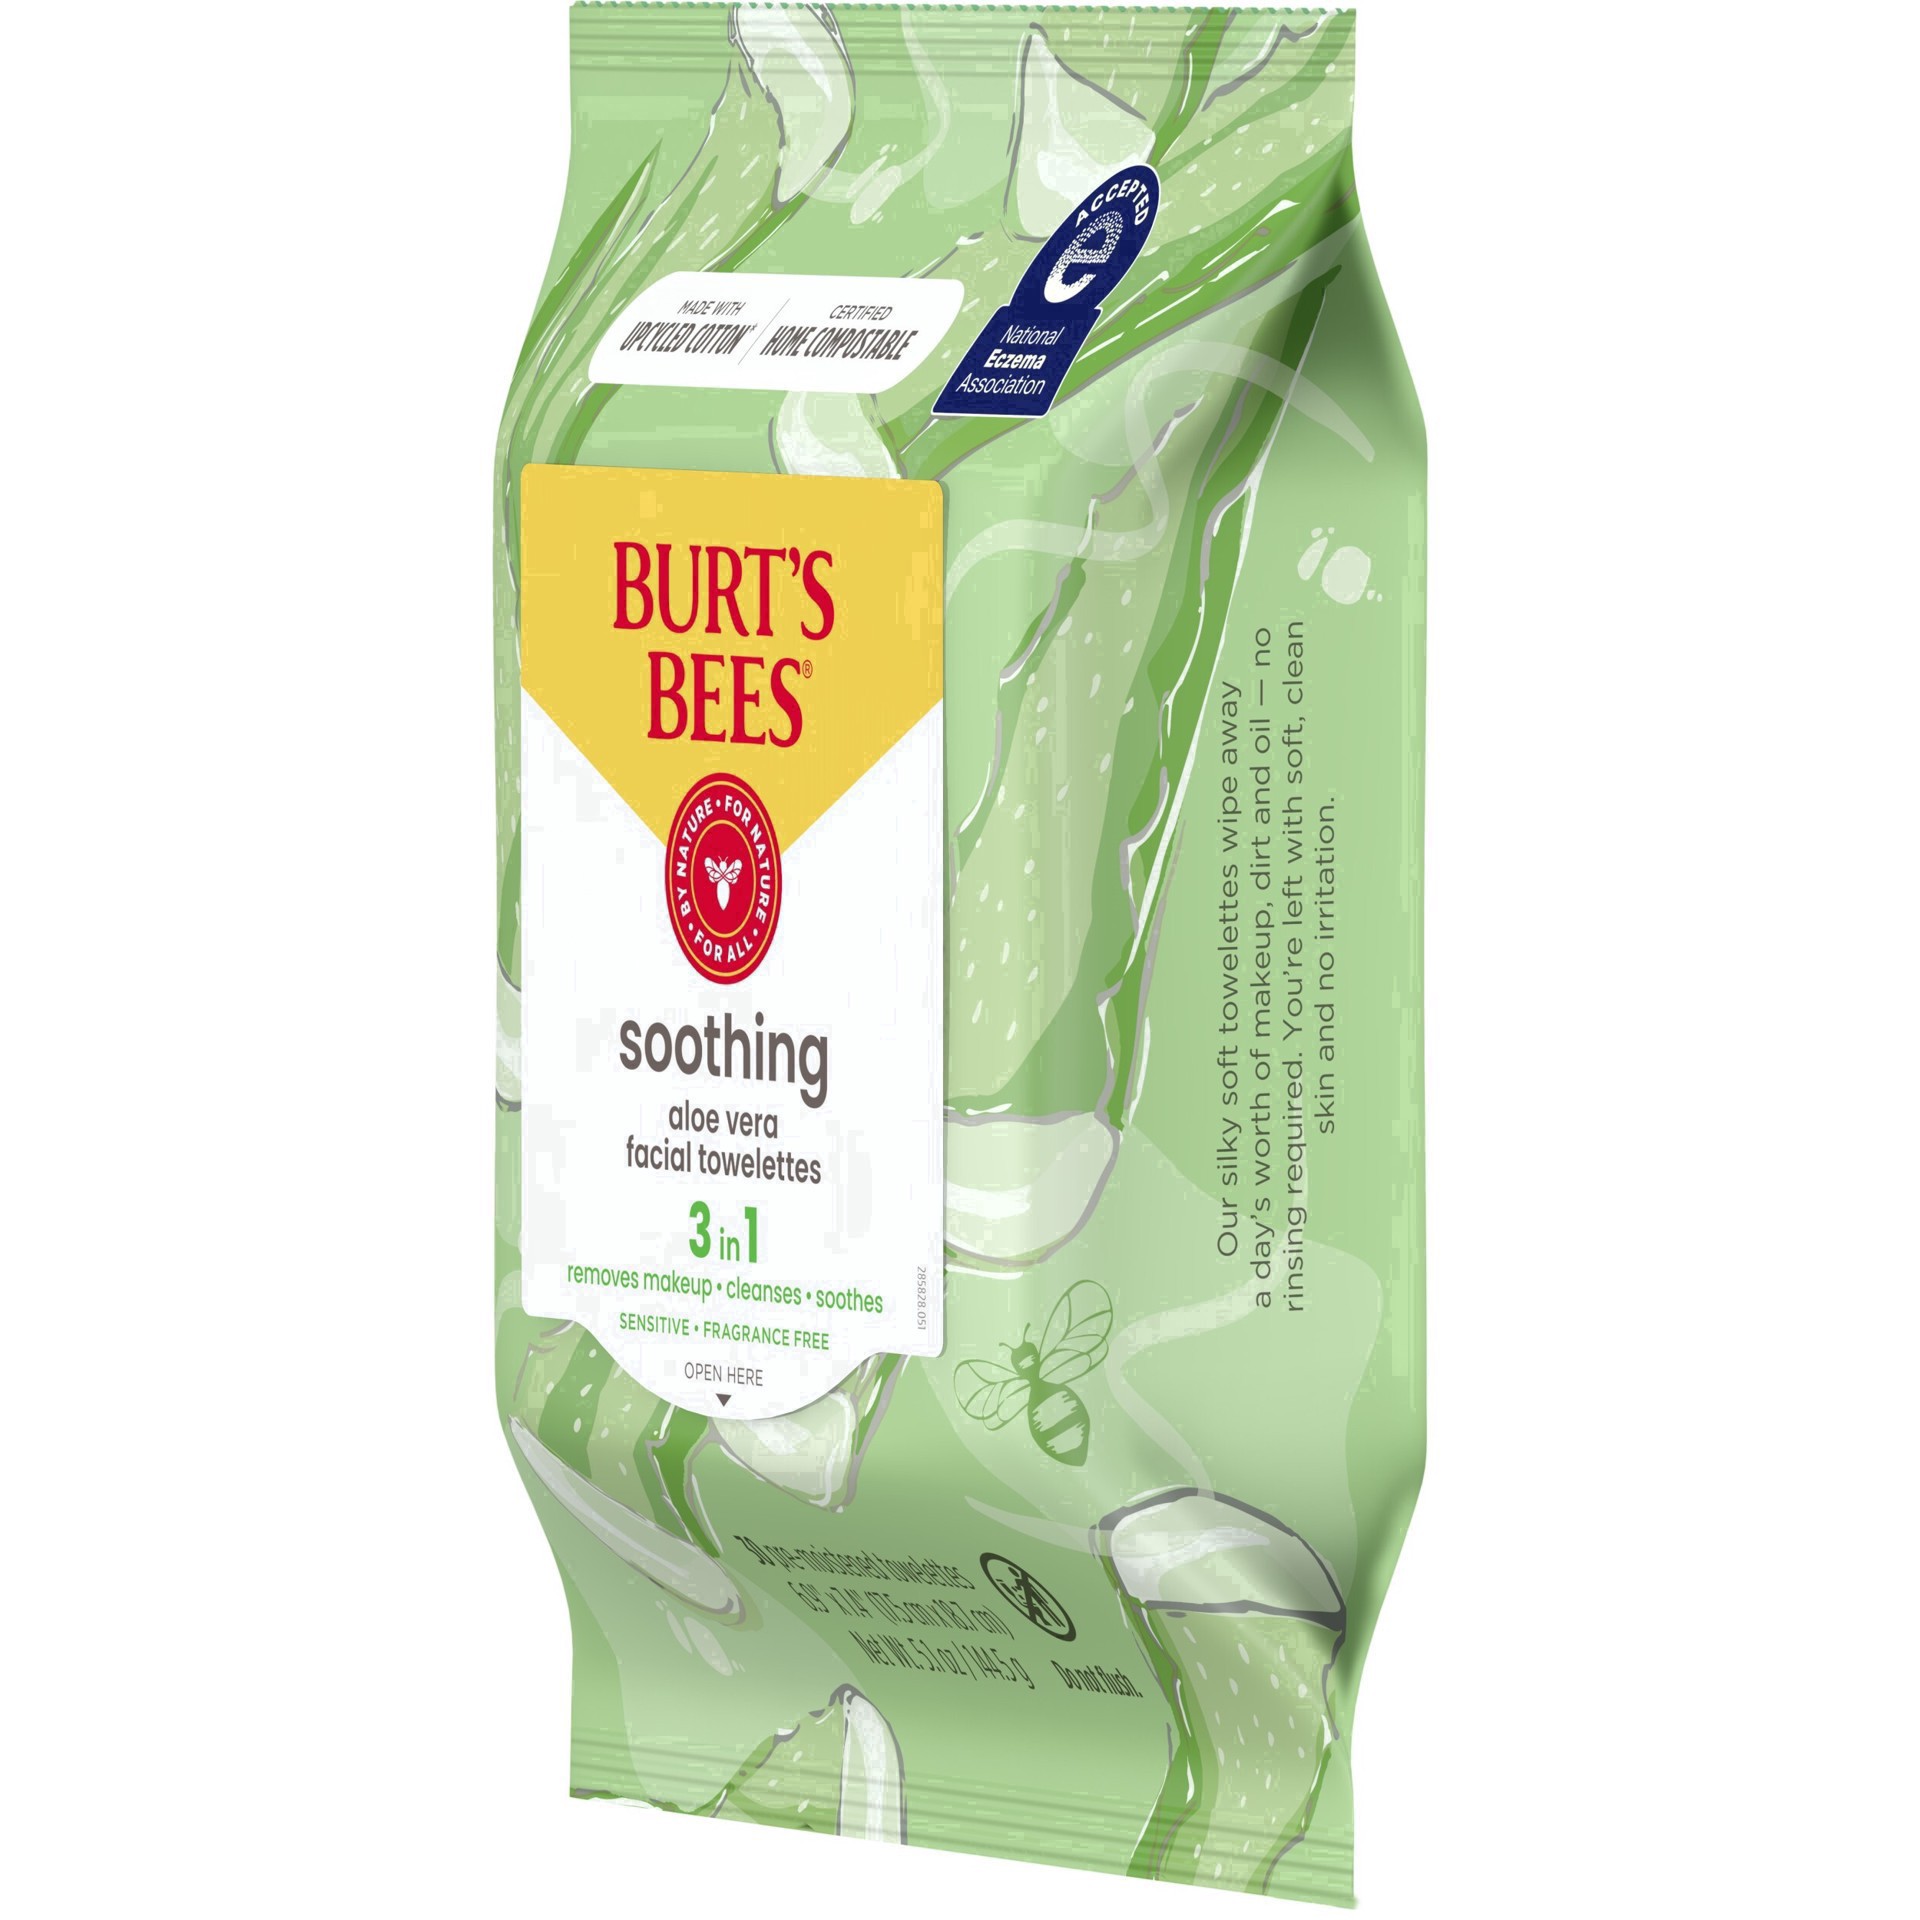 slide 123 of 137, Burt's Bees Soothing Facial Cleanser and Makeup Remover Towelettes with Aloe Vera for Sensitive Skin, Made with Upcycled Cotton, 30 Count, 30 ct